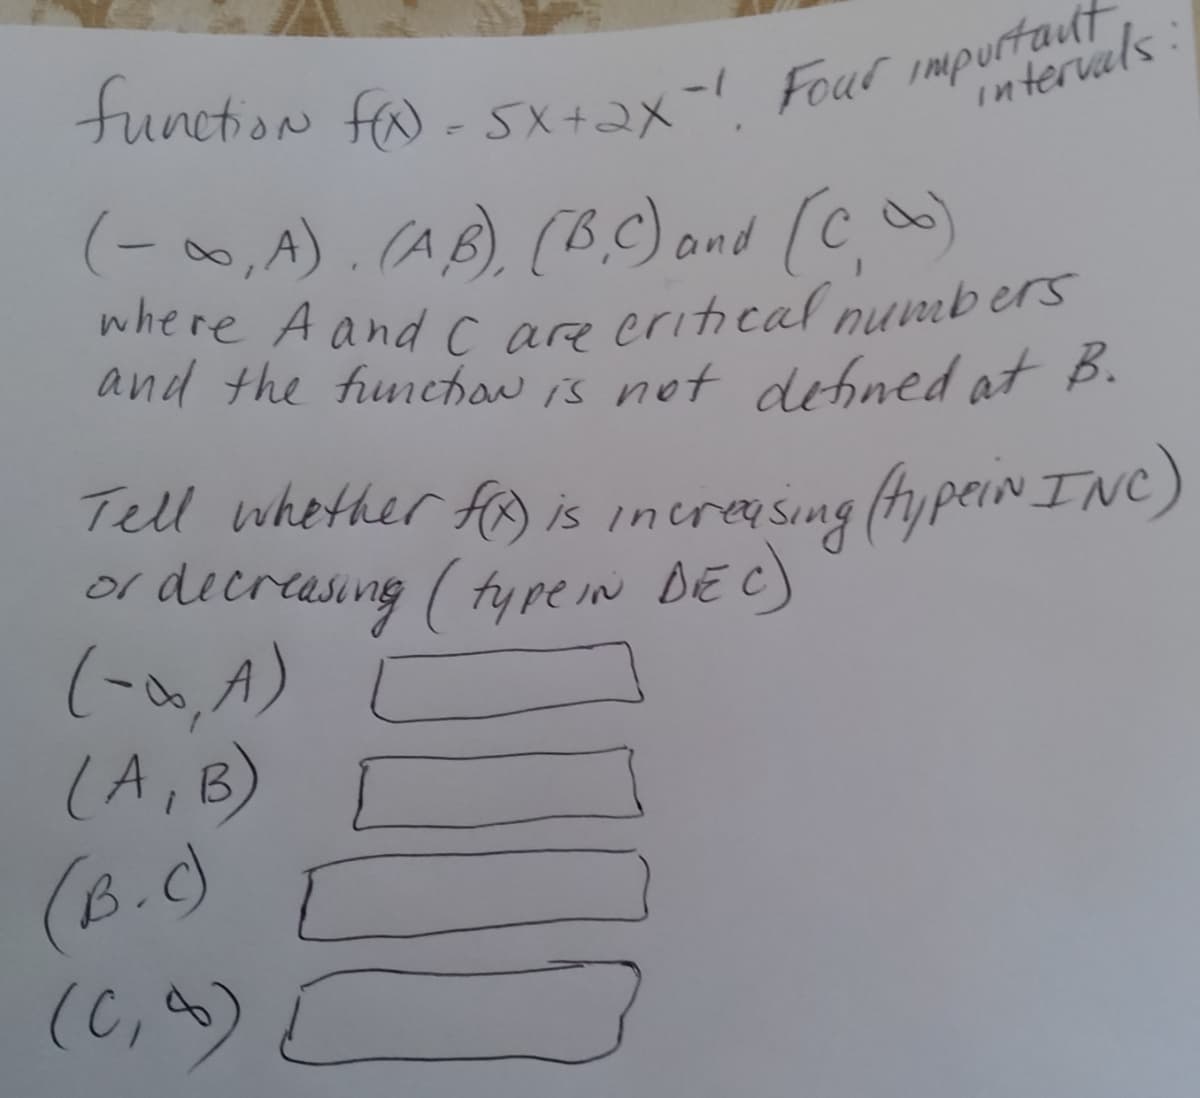 tunction fa - sX+2x- Four impurterval
where A and c are eritical numb ers
(-0,A).
(AB) (B.C) and (C)
where A and c are eritical nummbers
and the funehow is not detined at B.
Tell whether fo is increasing (fypein INC)
or dieresing ( fyre in DEC)
(-o, A)
(A,B) [
(B.C)
(C,)
